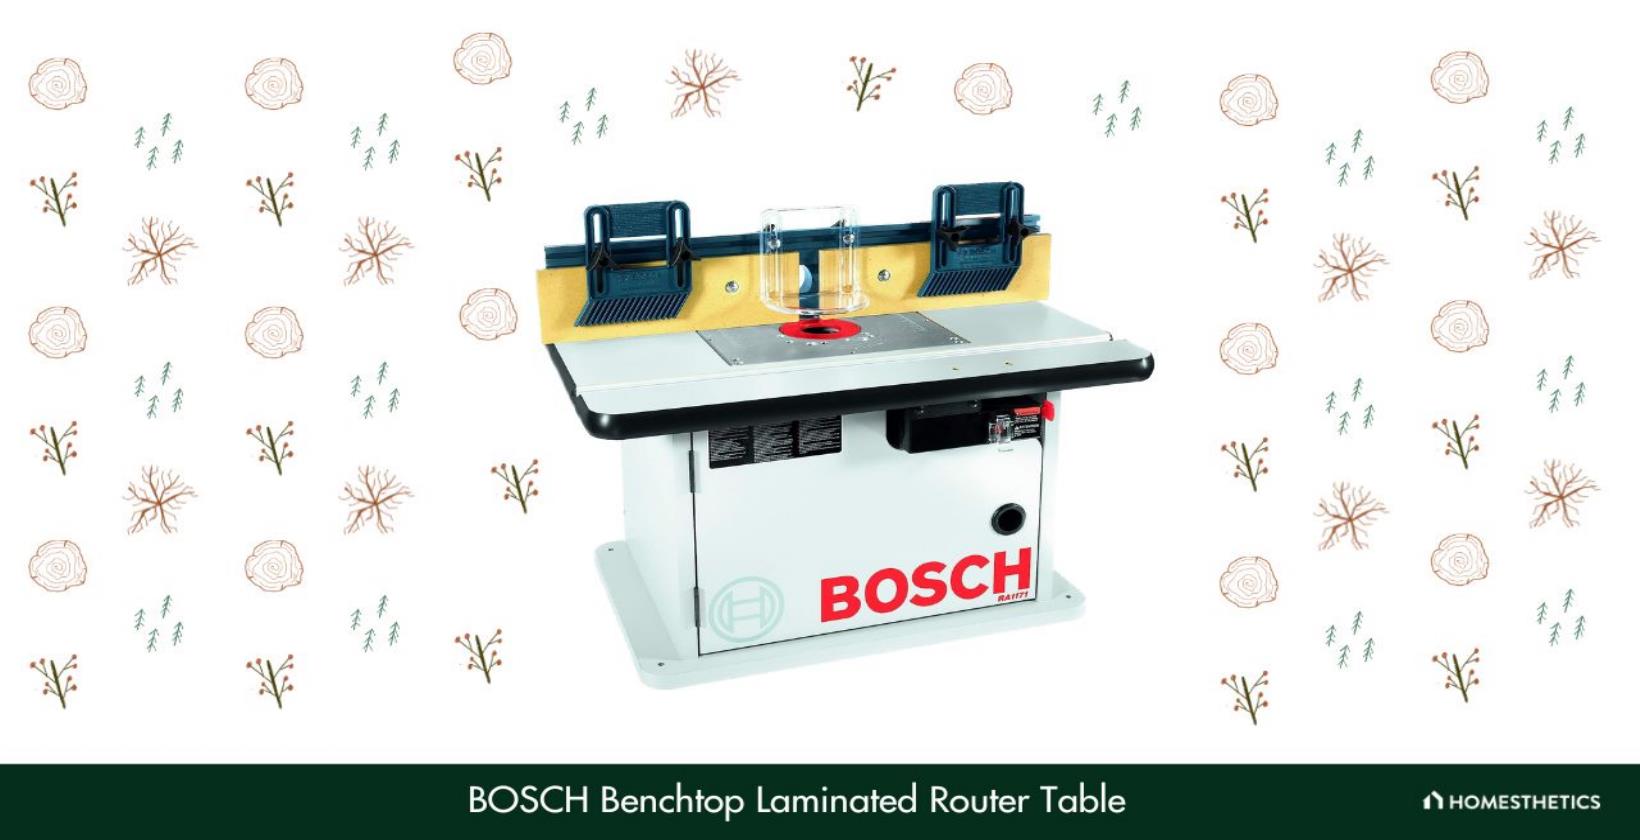 2. BOSCH Benchtop Laminated Router Table